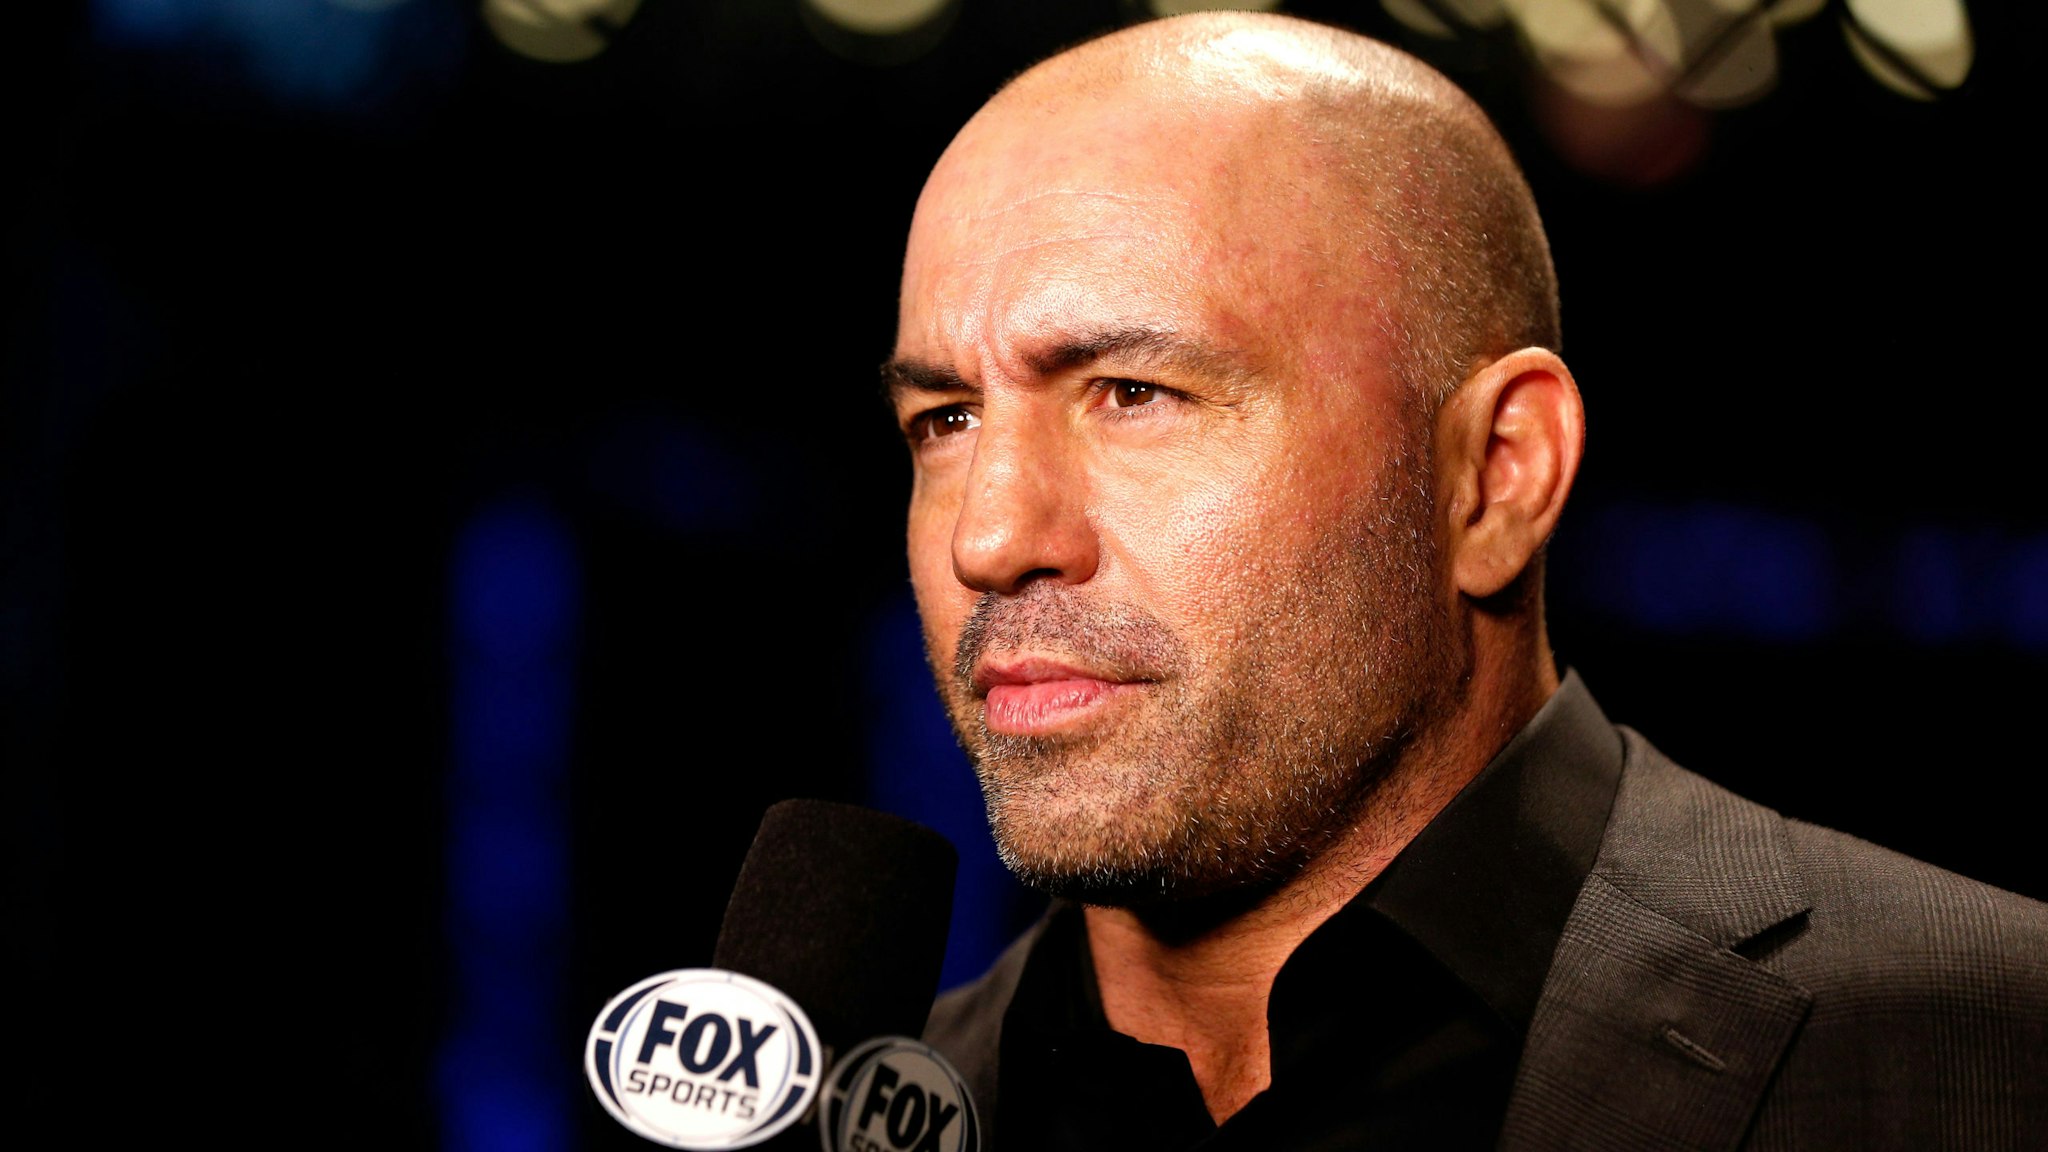 ORLANDO, FL - APRIL 19: UFC color commentator Joe Rogan speaks on camera during the FOX UFC Saturday event at the Amway Center on April 19, 2014 in Orlando, Florida.